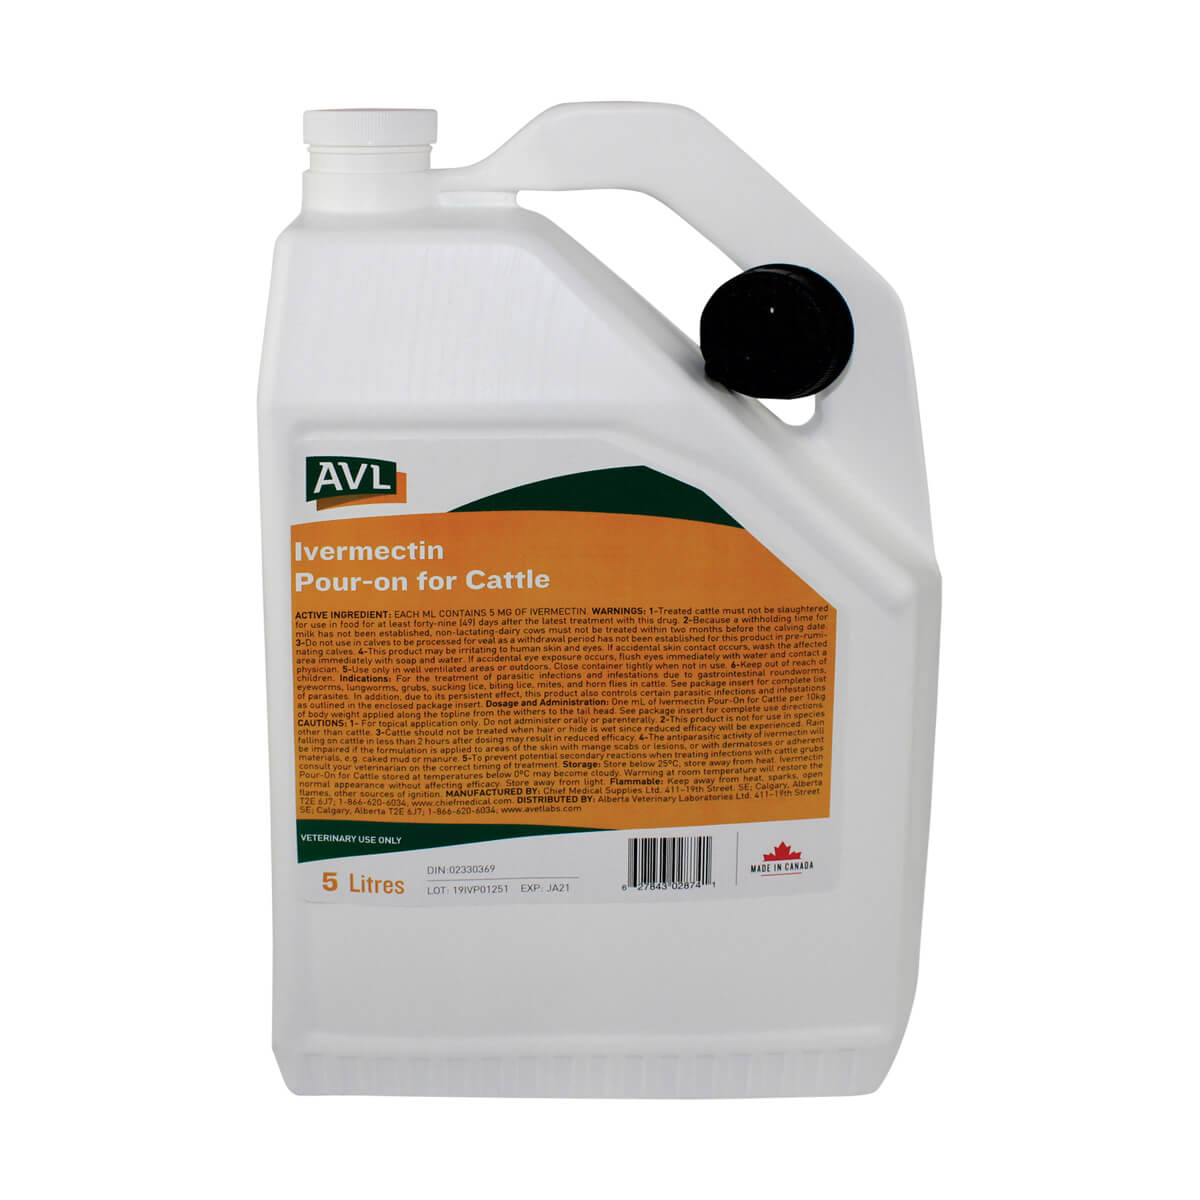 AVL Ivermectin Pour-on For Cattle - 5 L